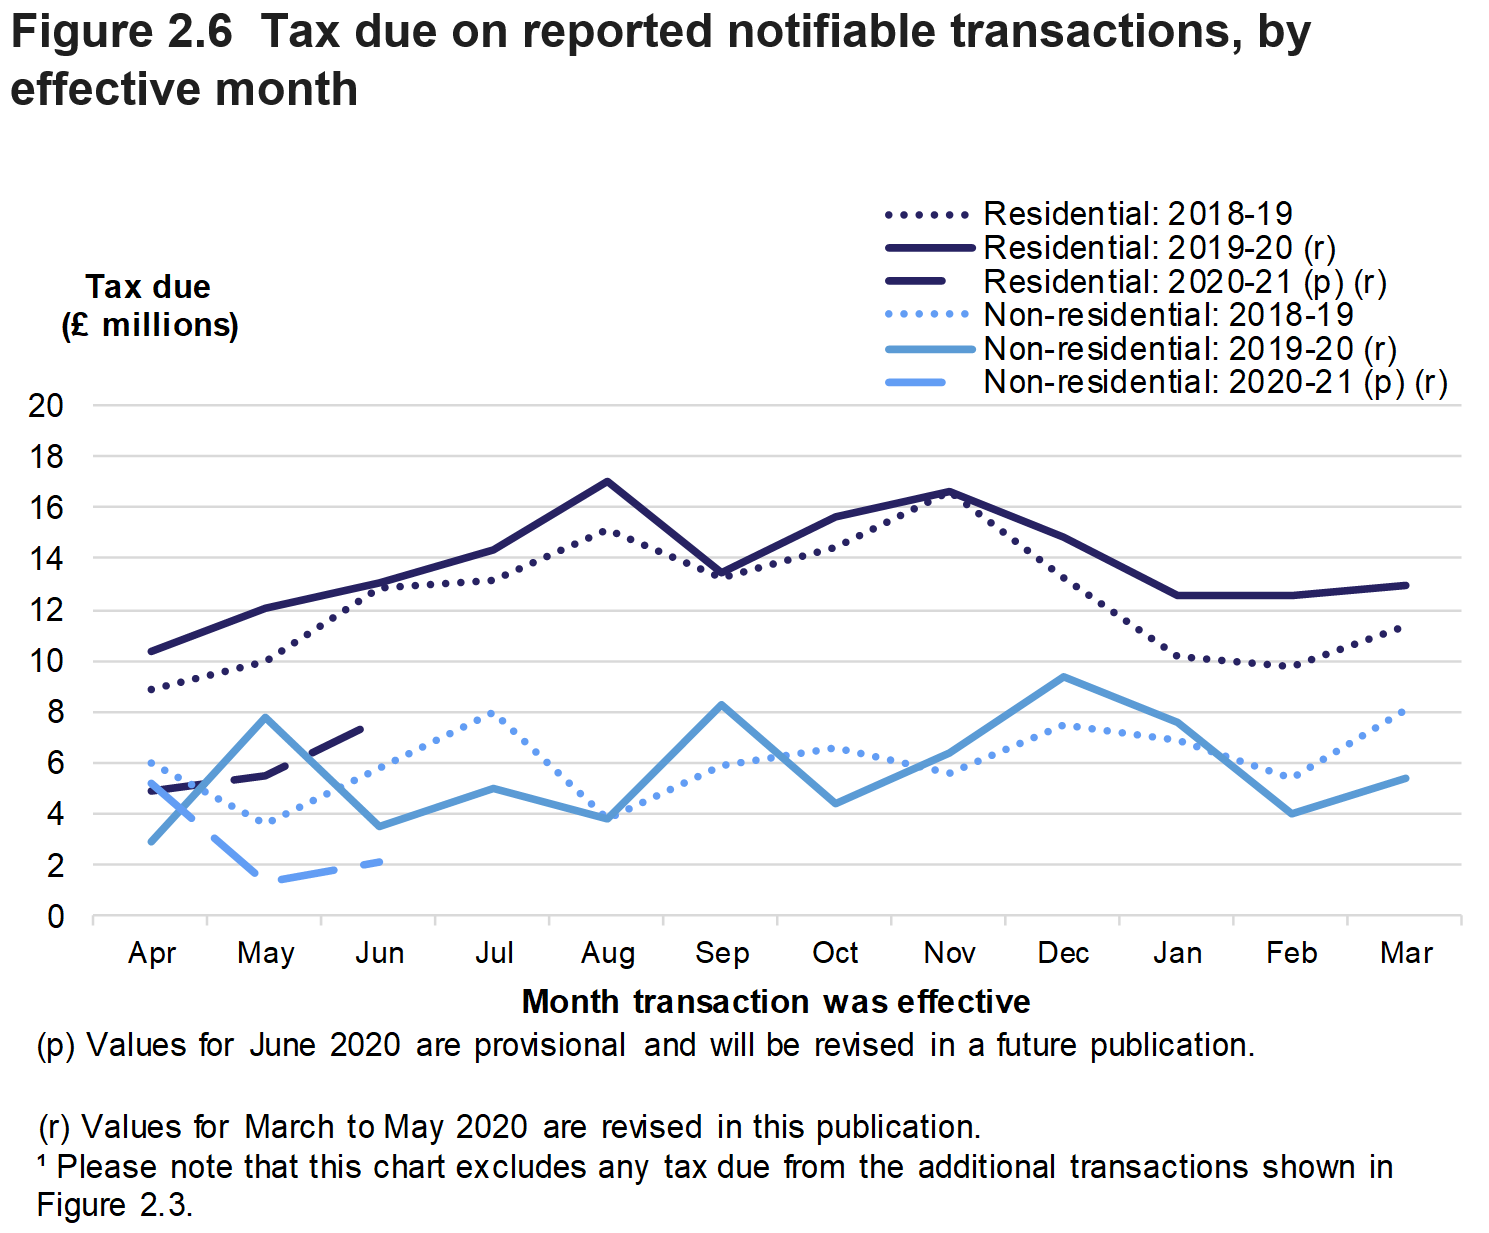 Figure 2.6 shows the monthly amount of tax due on reported notifiable transactions from April 2018 to June 2020, for residential and non-residential transactions.